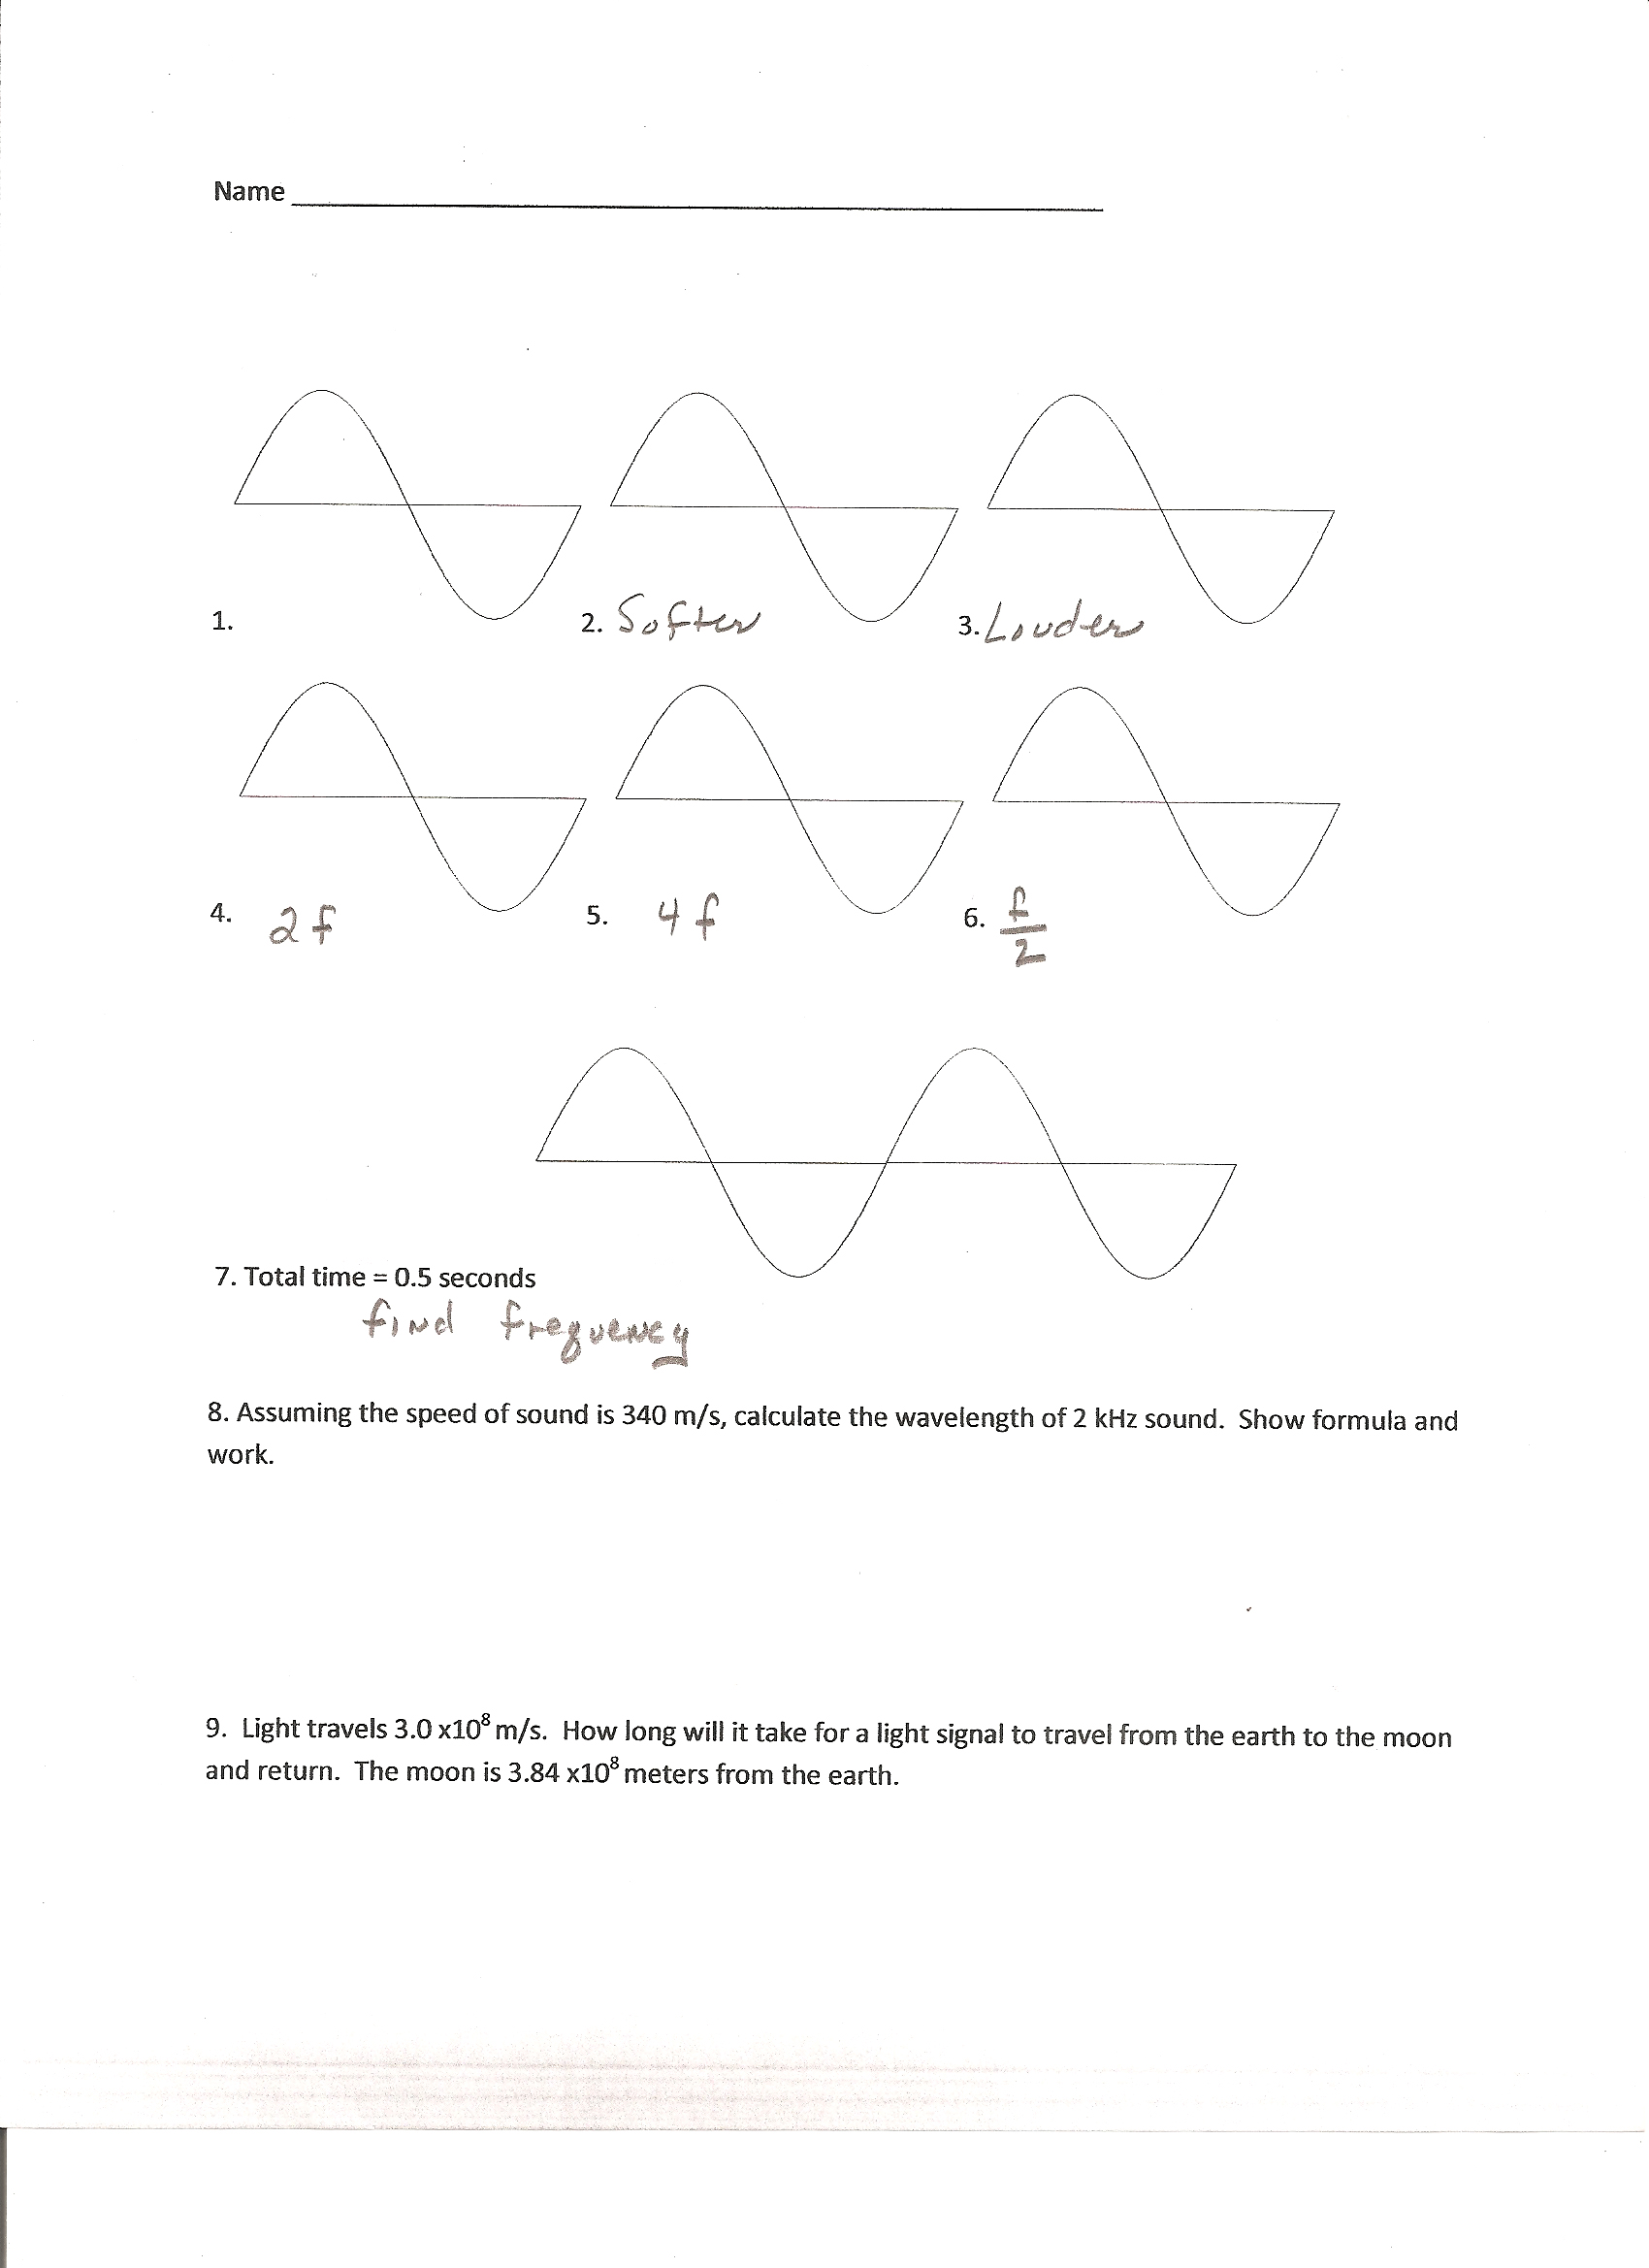 waves-and-sound-worksheet-answer-key-waves-and-sound-worksheet-answers-png-image-transparent